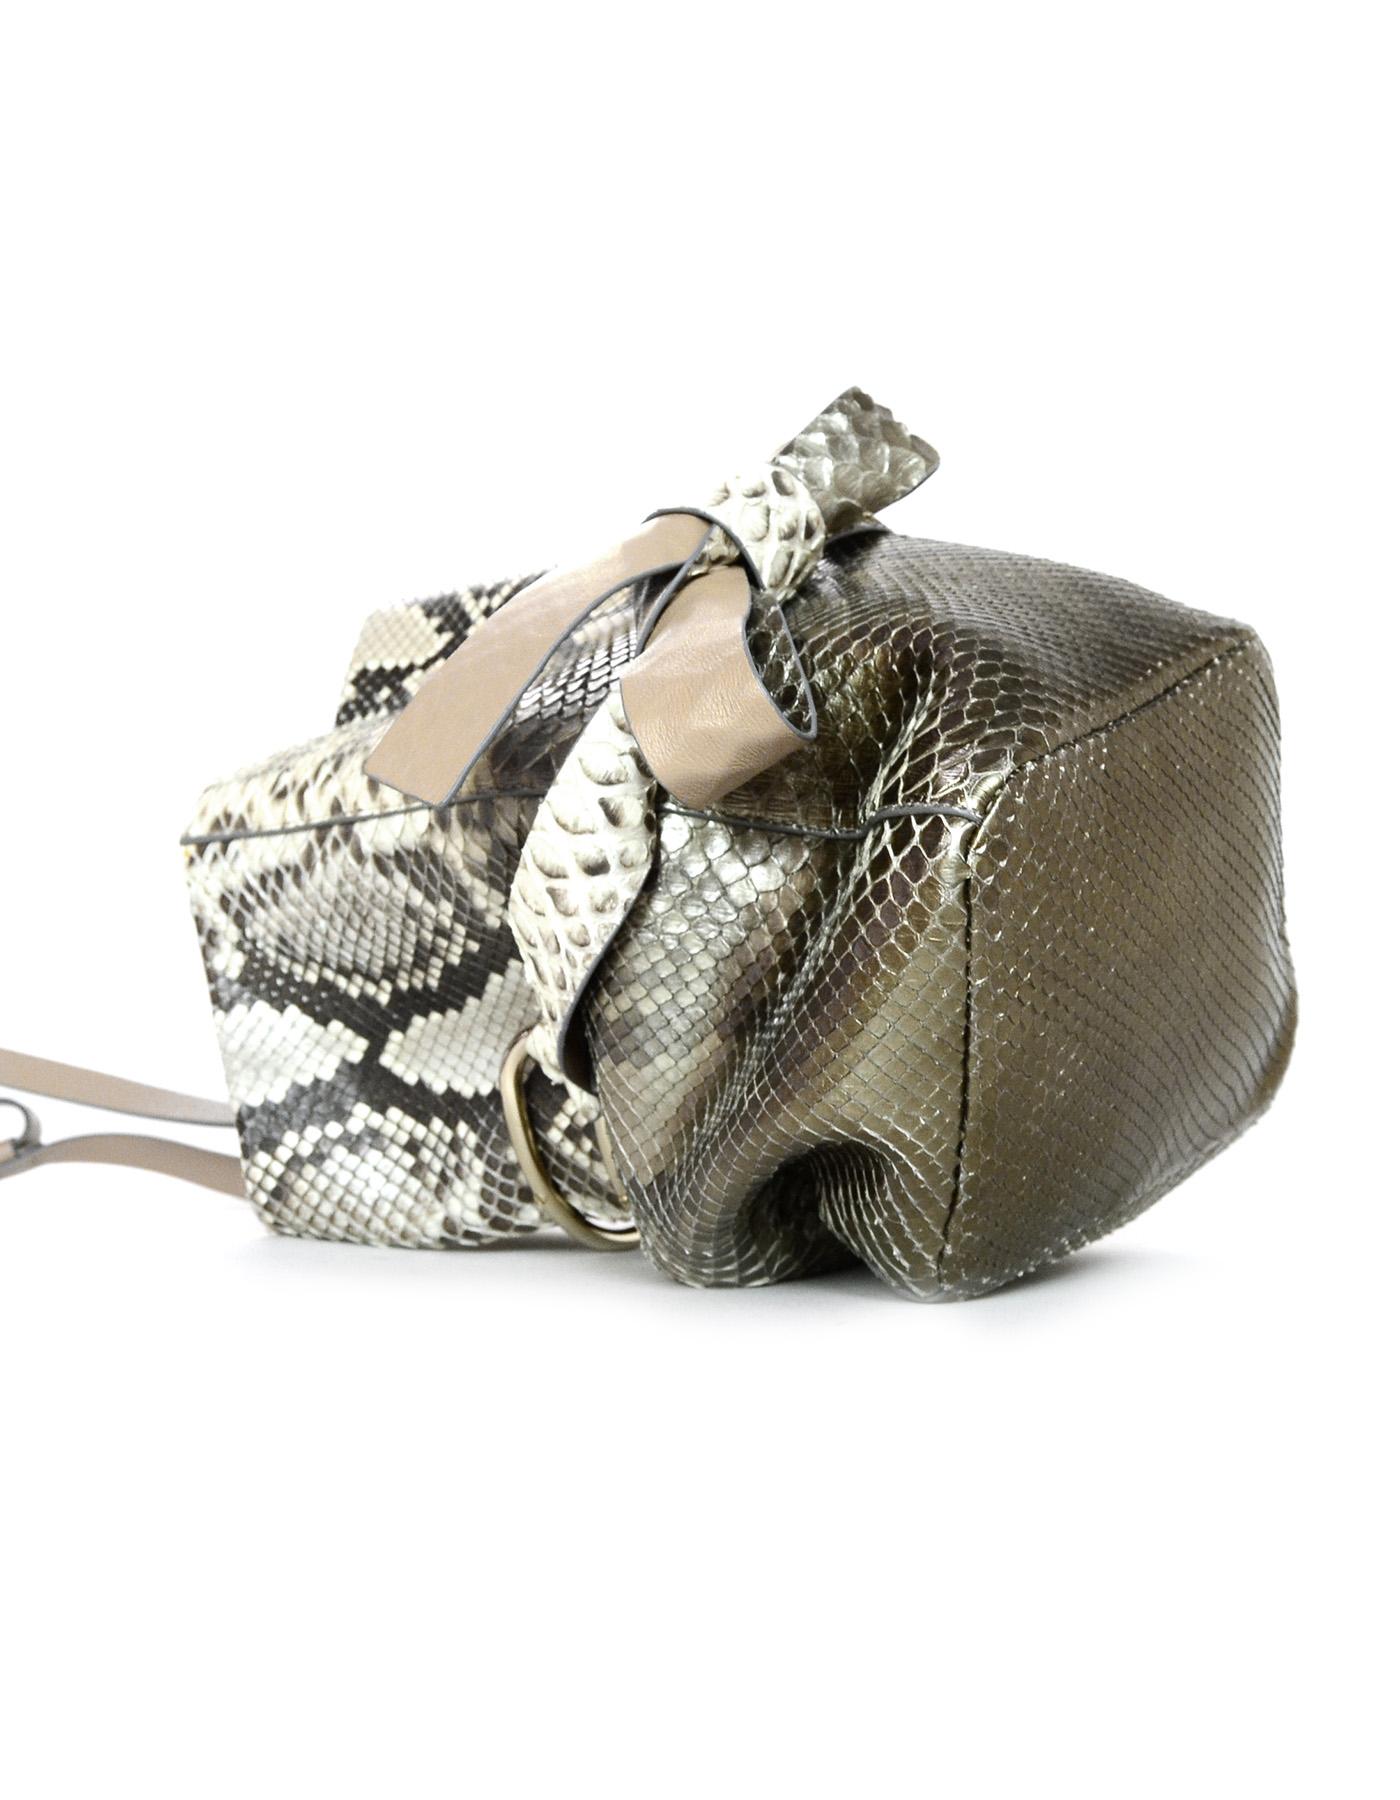 Jimmy Choo Natural Eve Metallic Degrade Python Snakeskin Bucket Bag In Excellent Condition In New York, NY